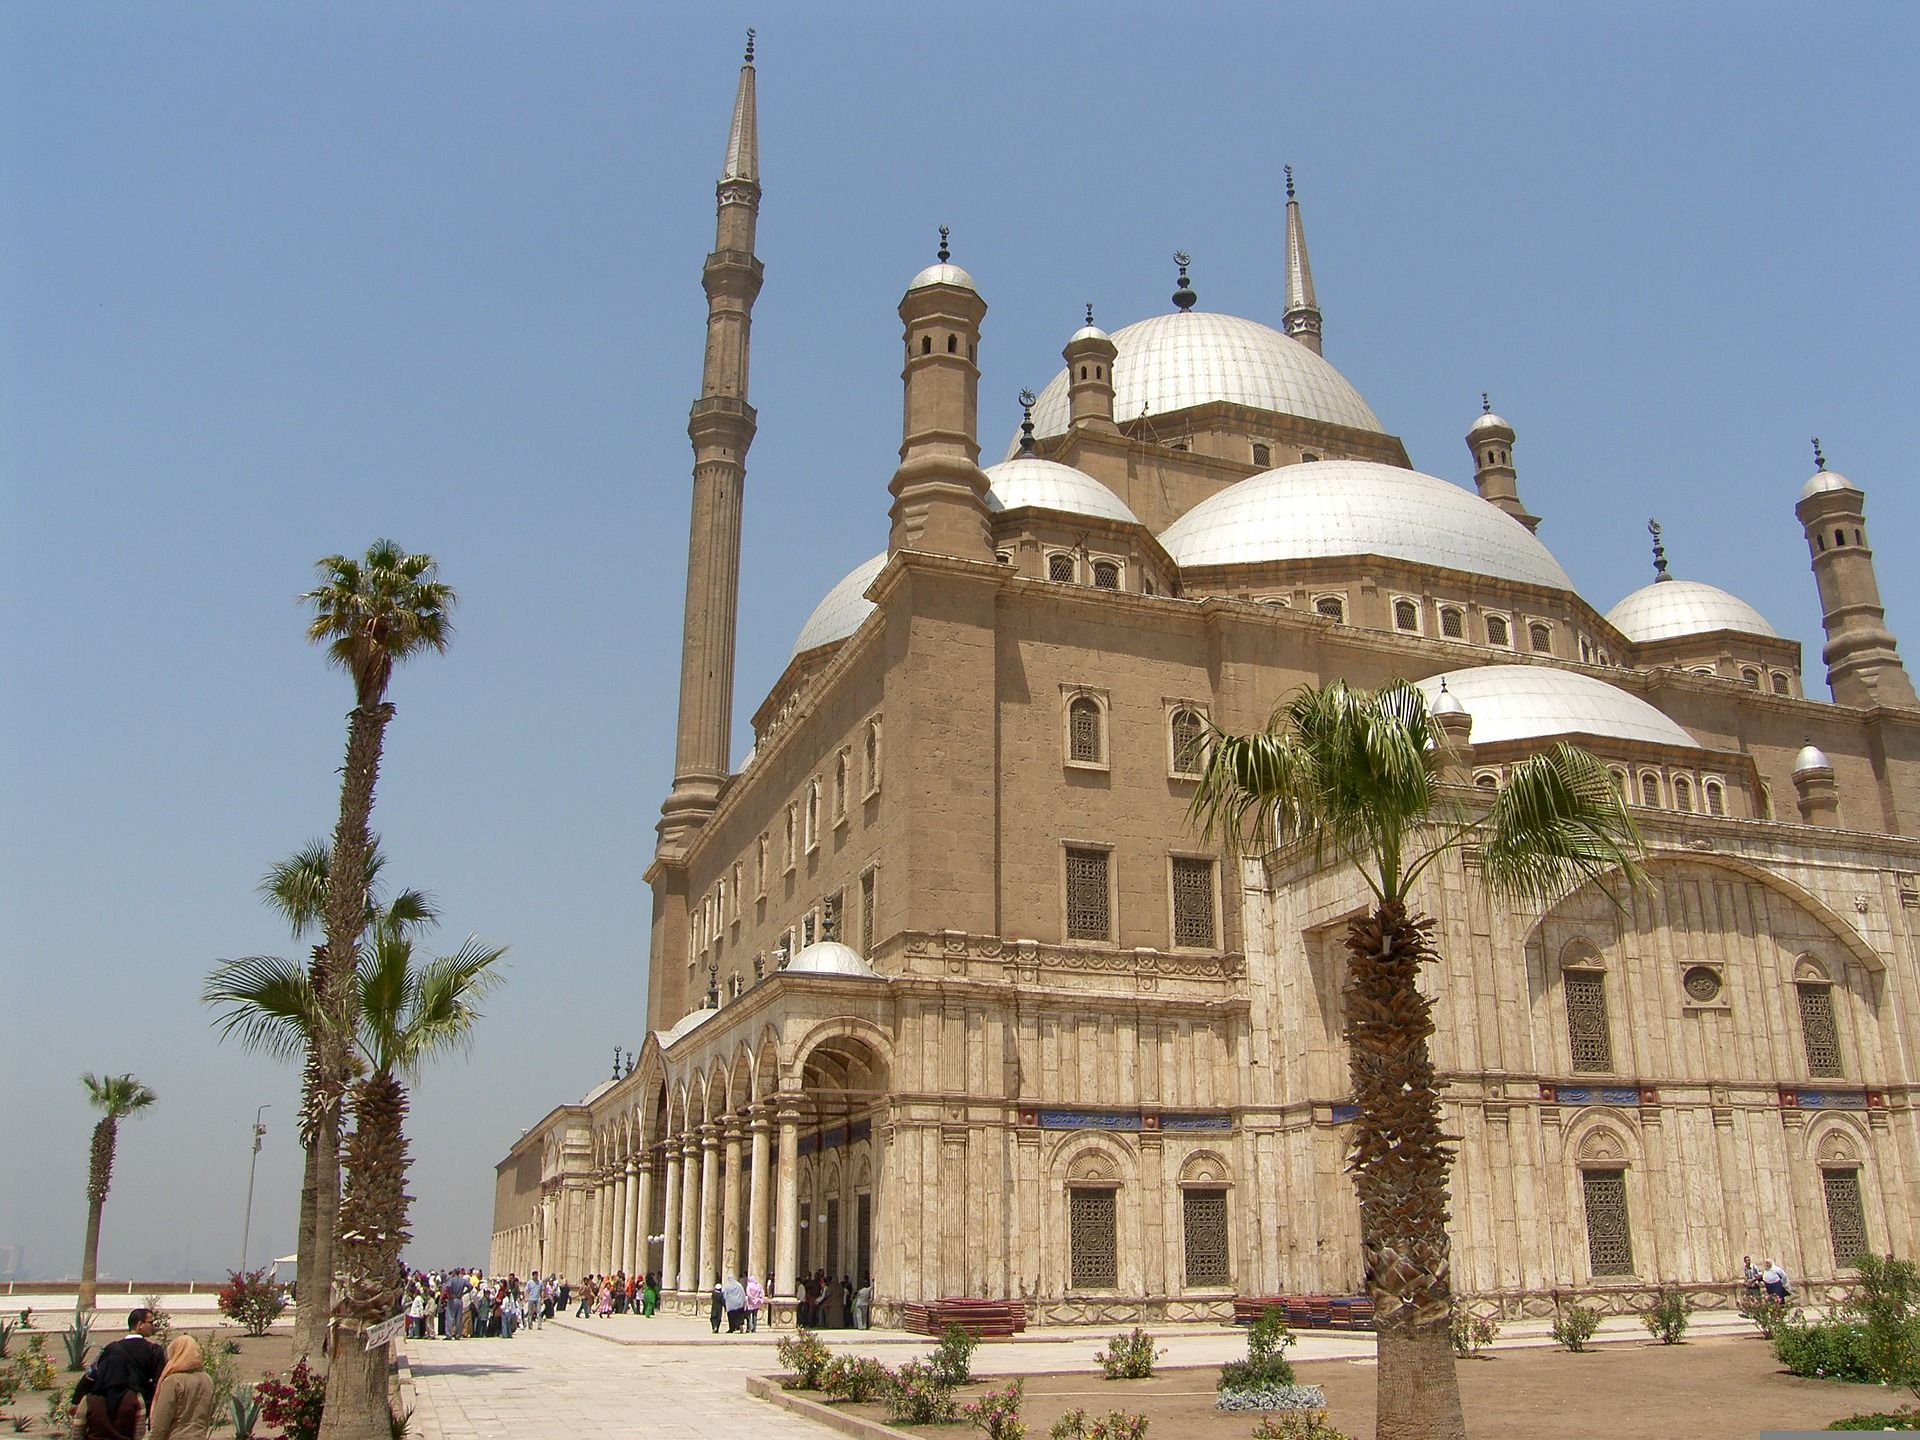 Amazon Quiz: In which city is this famous mosque situated?